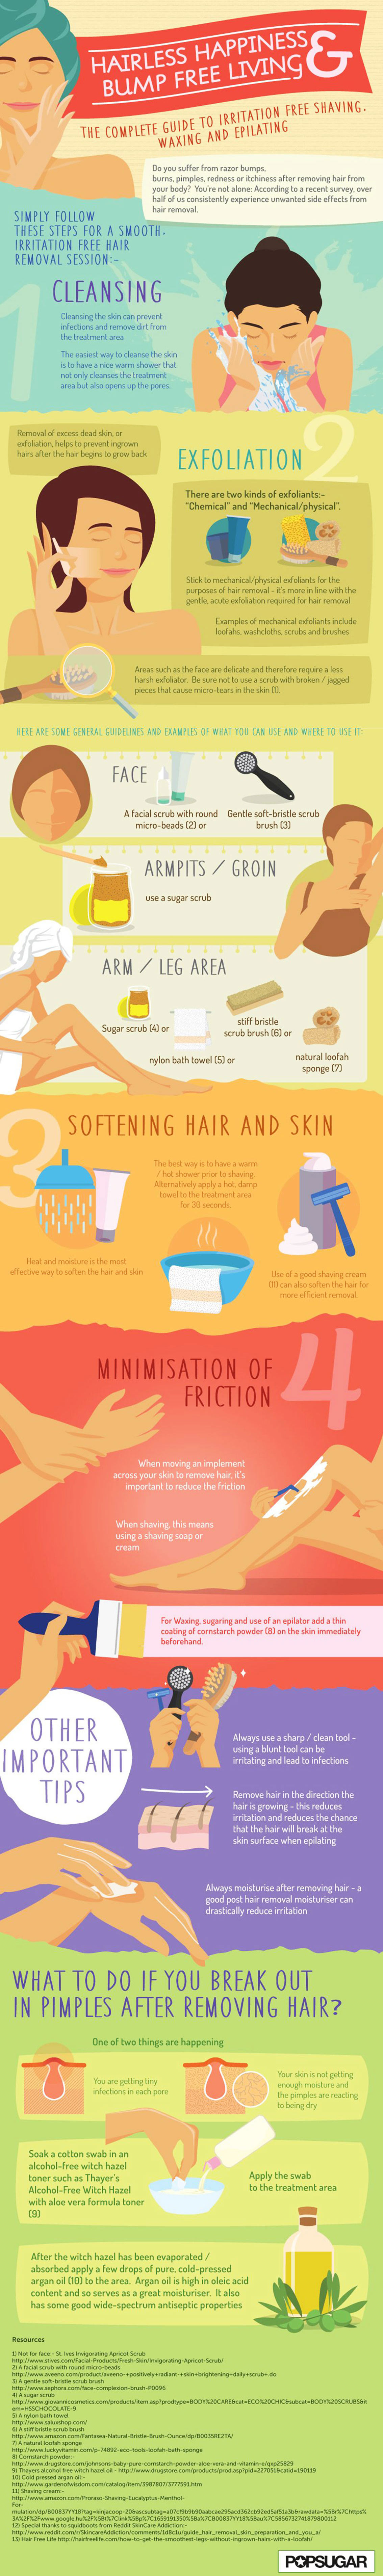 Women Guide to Irritation-Free Shaving, Waxing and Epilating - Beauty Tips Infographic